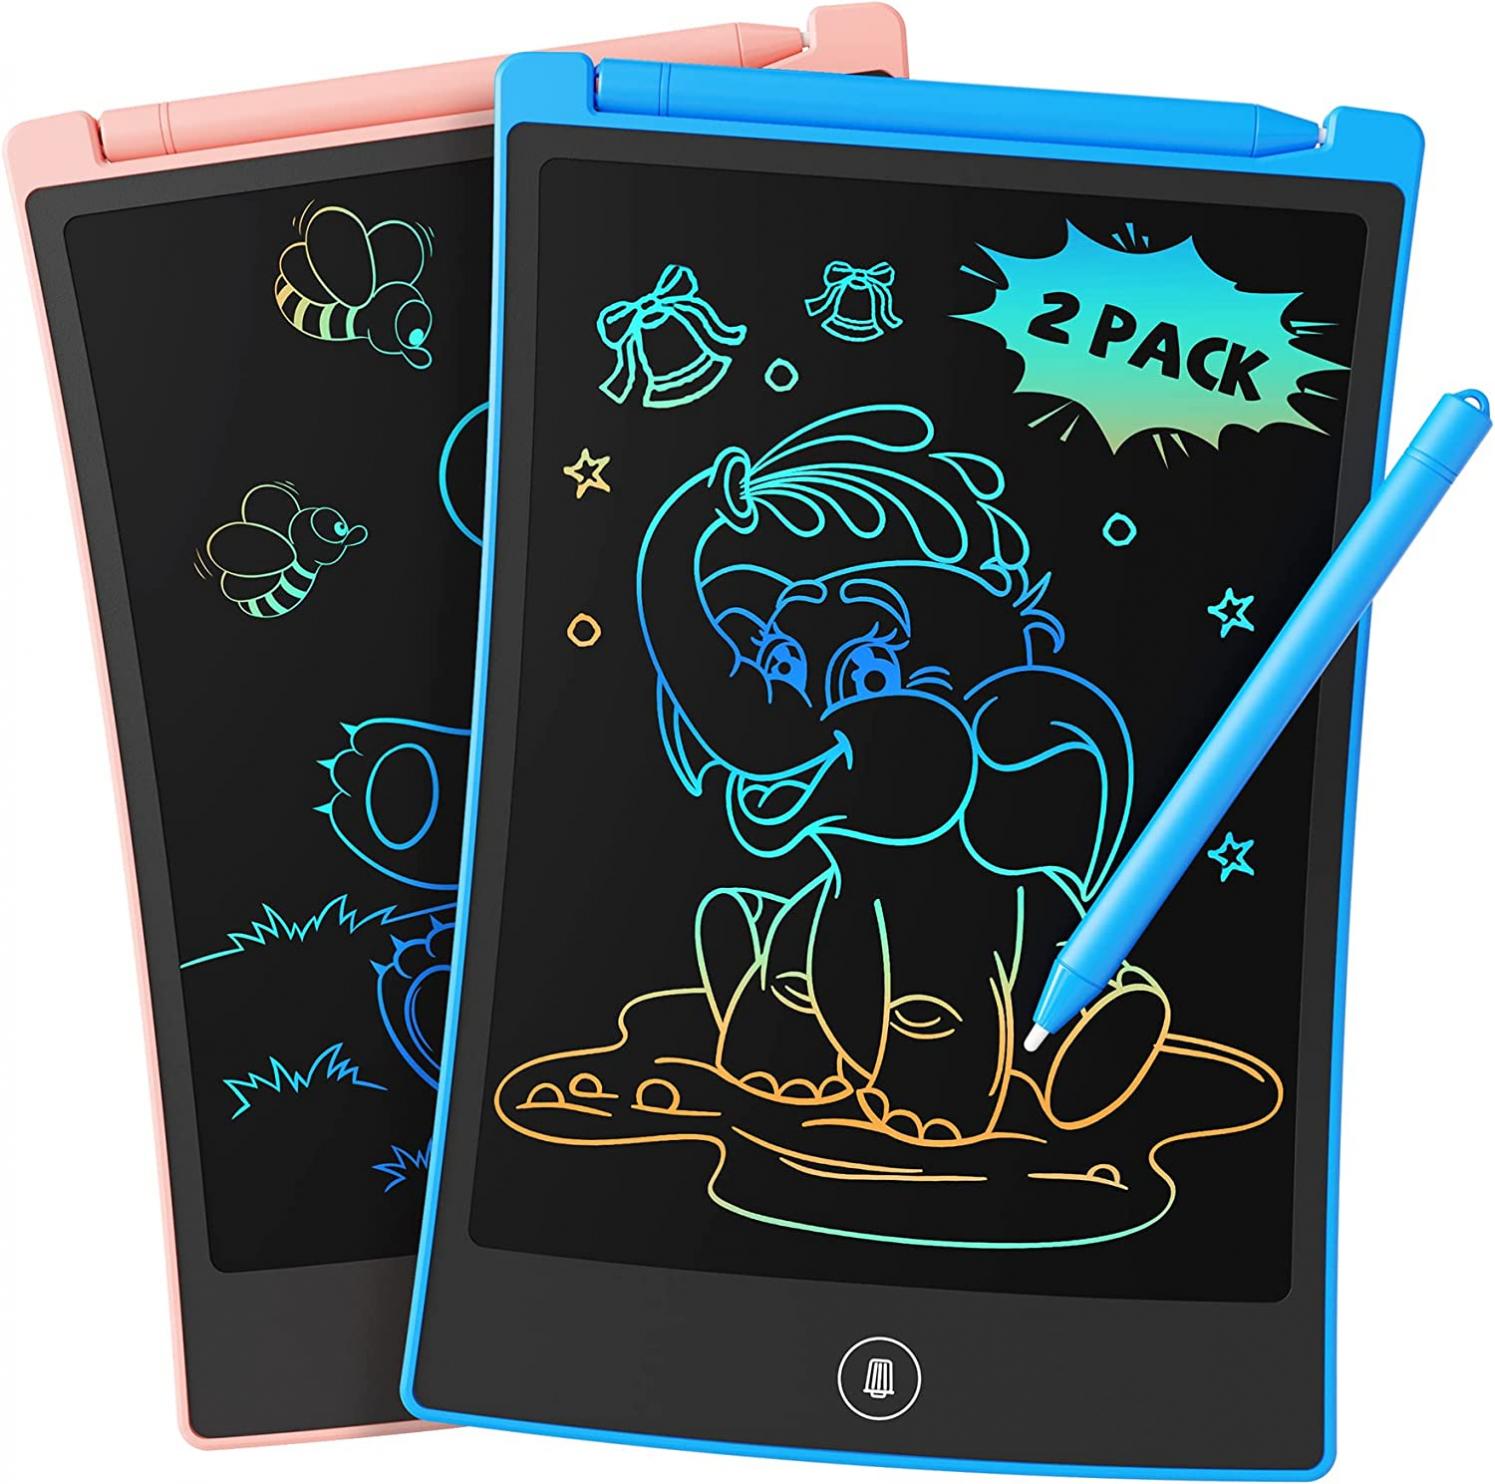 TEKFUN Kids Toys, 2Pcs LCD Writing Tablet with 4 Stylus, 8.5in Erasable Doodle Board Mess Free Drawing Pad for Kids, Car Trip Educational Toys Birthday Christmas Gift for 3 4 5 6 7 Girls Boys